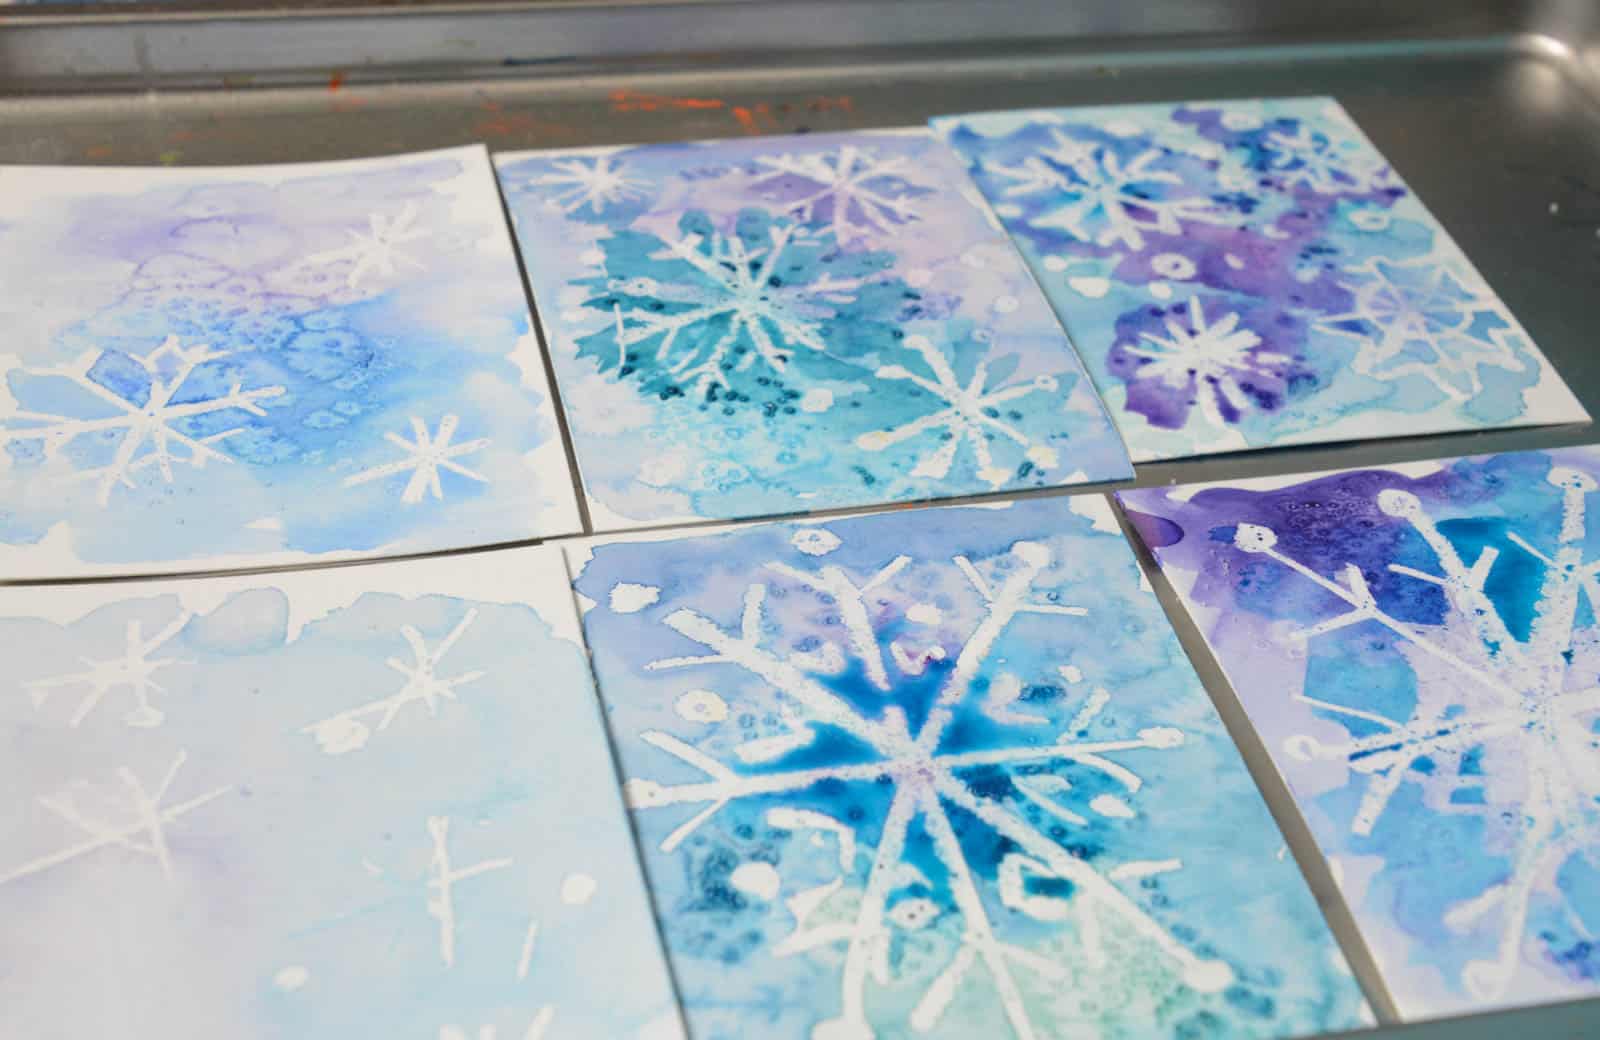 six small snowflake watercolor paintings with blue and purple skies.